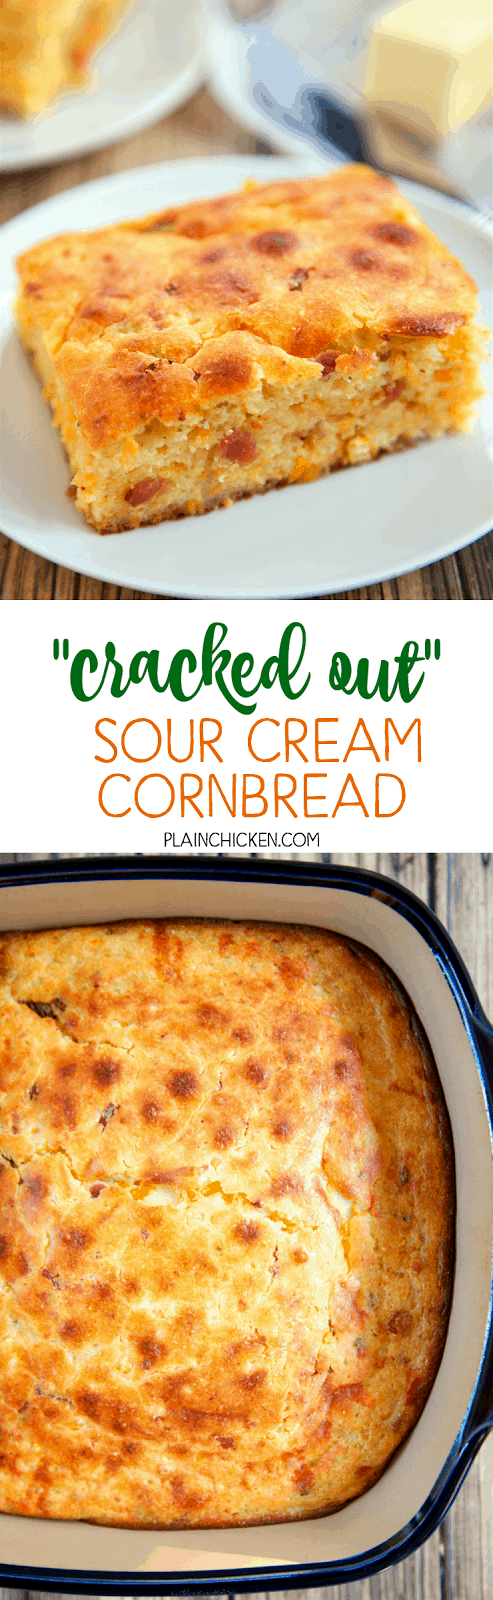 "Cracked Out" Sour Cream Cornbread - quick cornbread recipe kicked up with cheddar, bacon and Ranch. Cornmeal, sour cream, creamed corn, cheddar, bacon and Ranch. This is the most requested cornbread recipe in our house. Everyone loves it! It is super easy to make and tastes amazing!